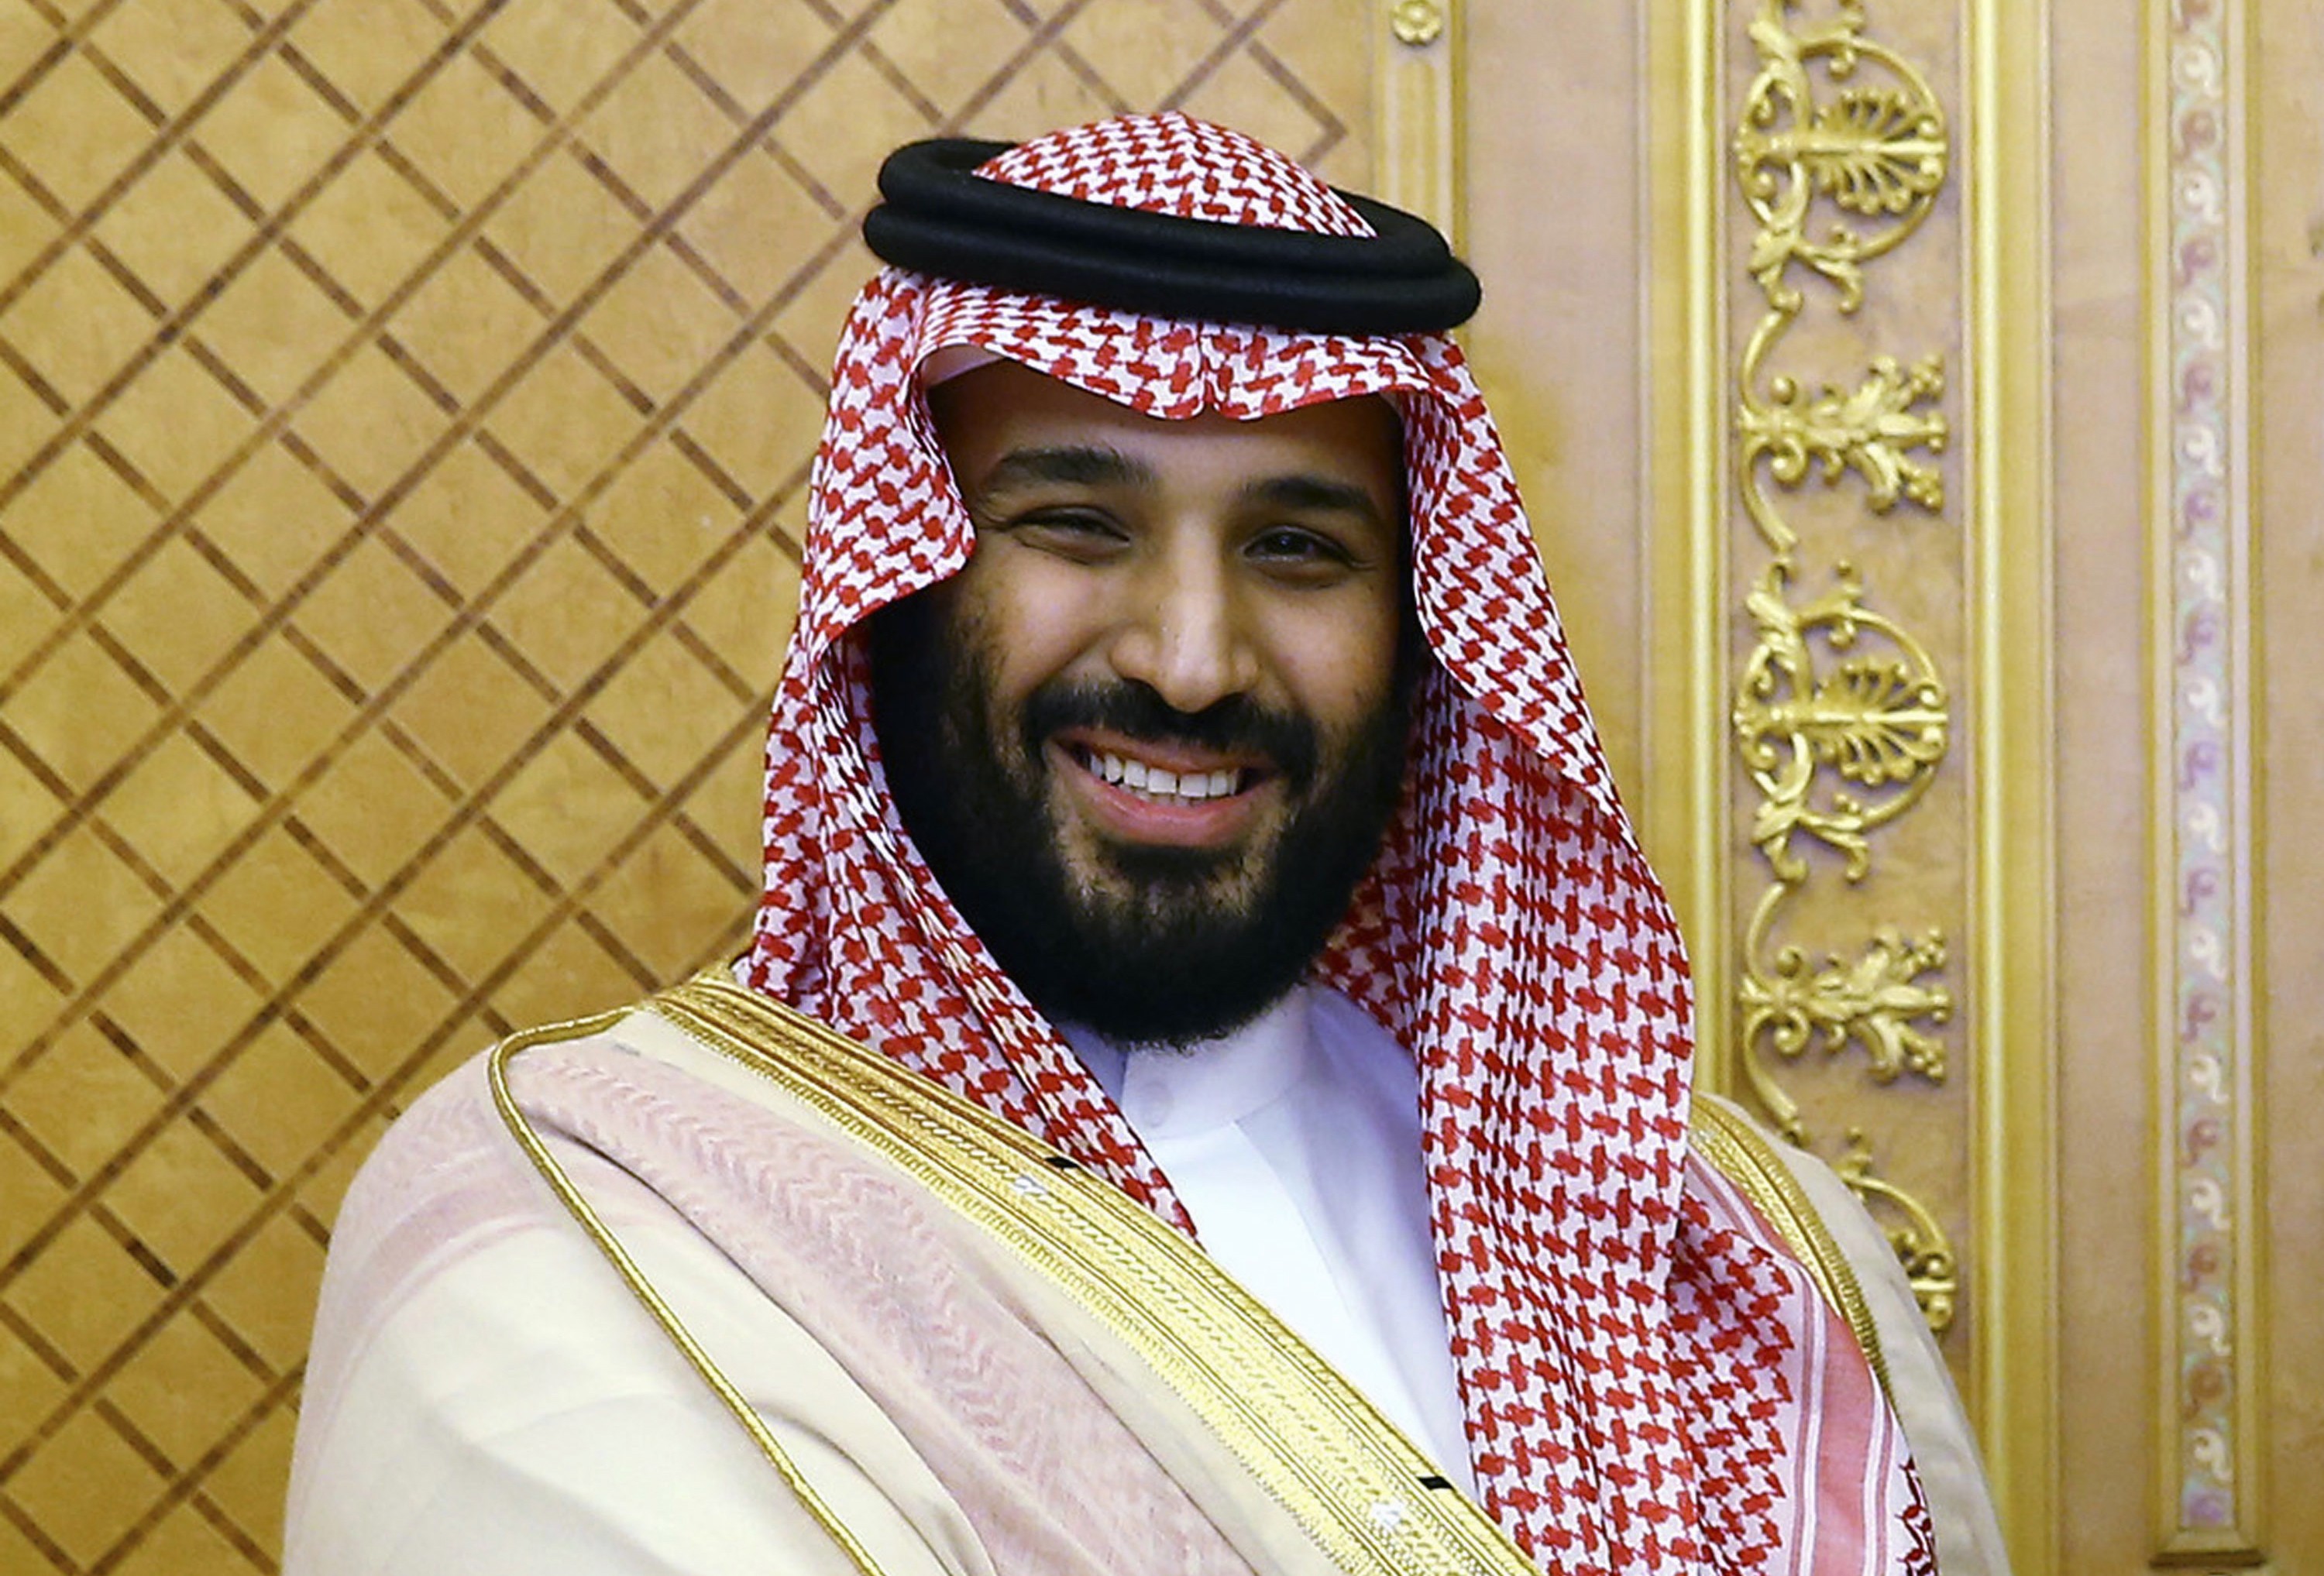 Prince Mohammed’s attack on royal family members and military commanders shows an intention to wield absolute power – but also speaks to his plans for reform and his approach to the war in Yemen